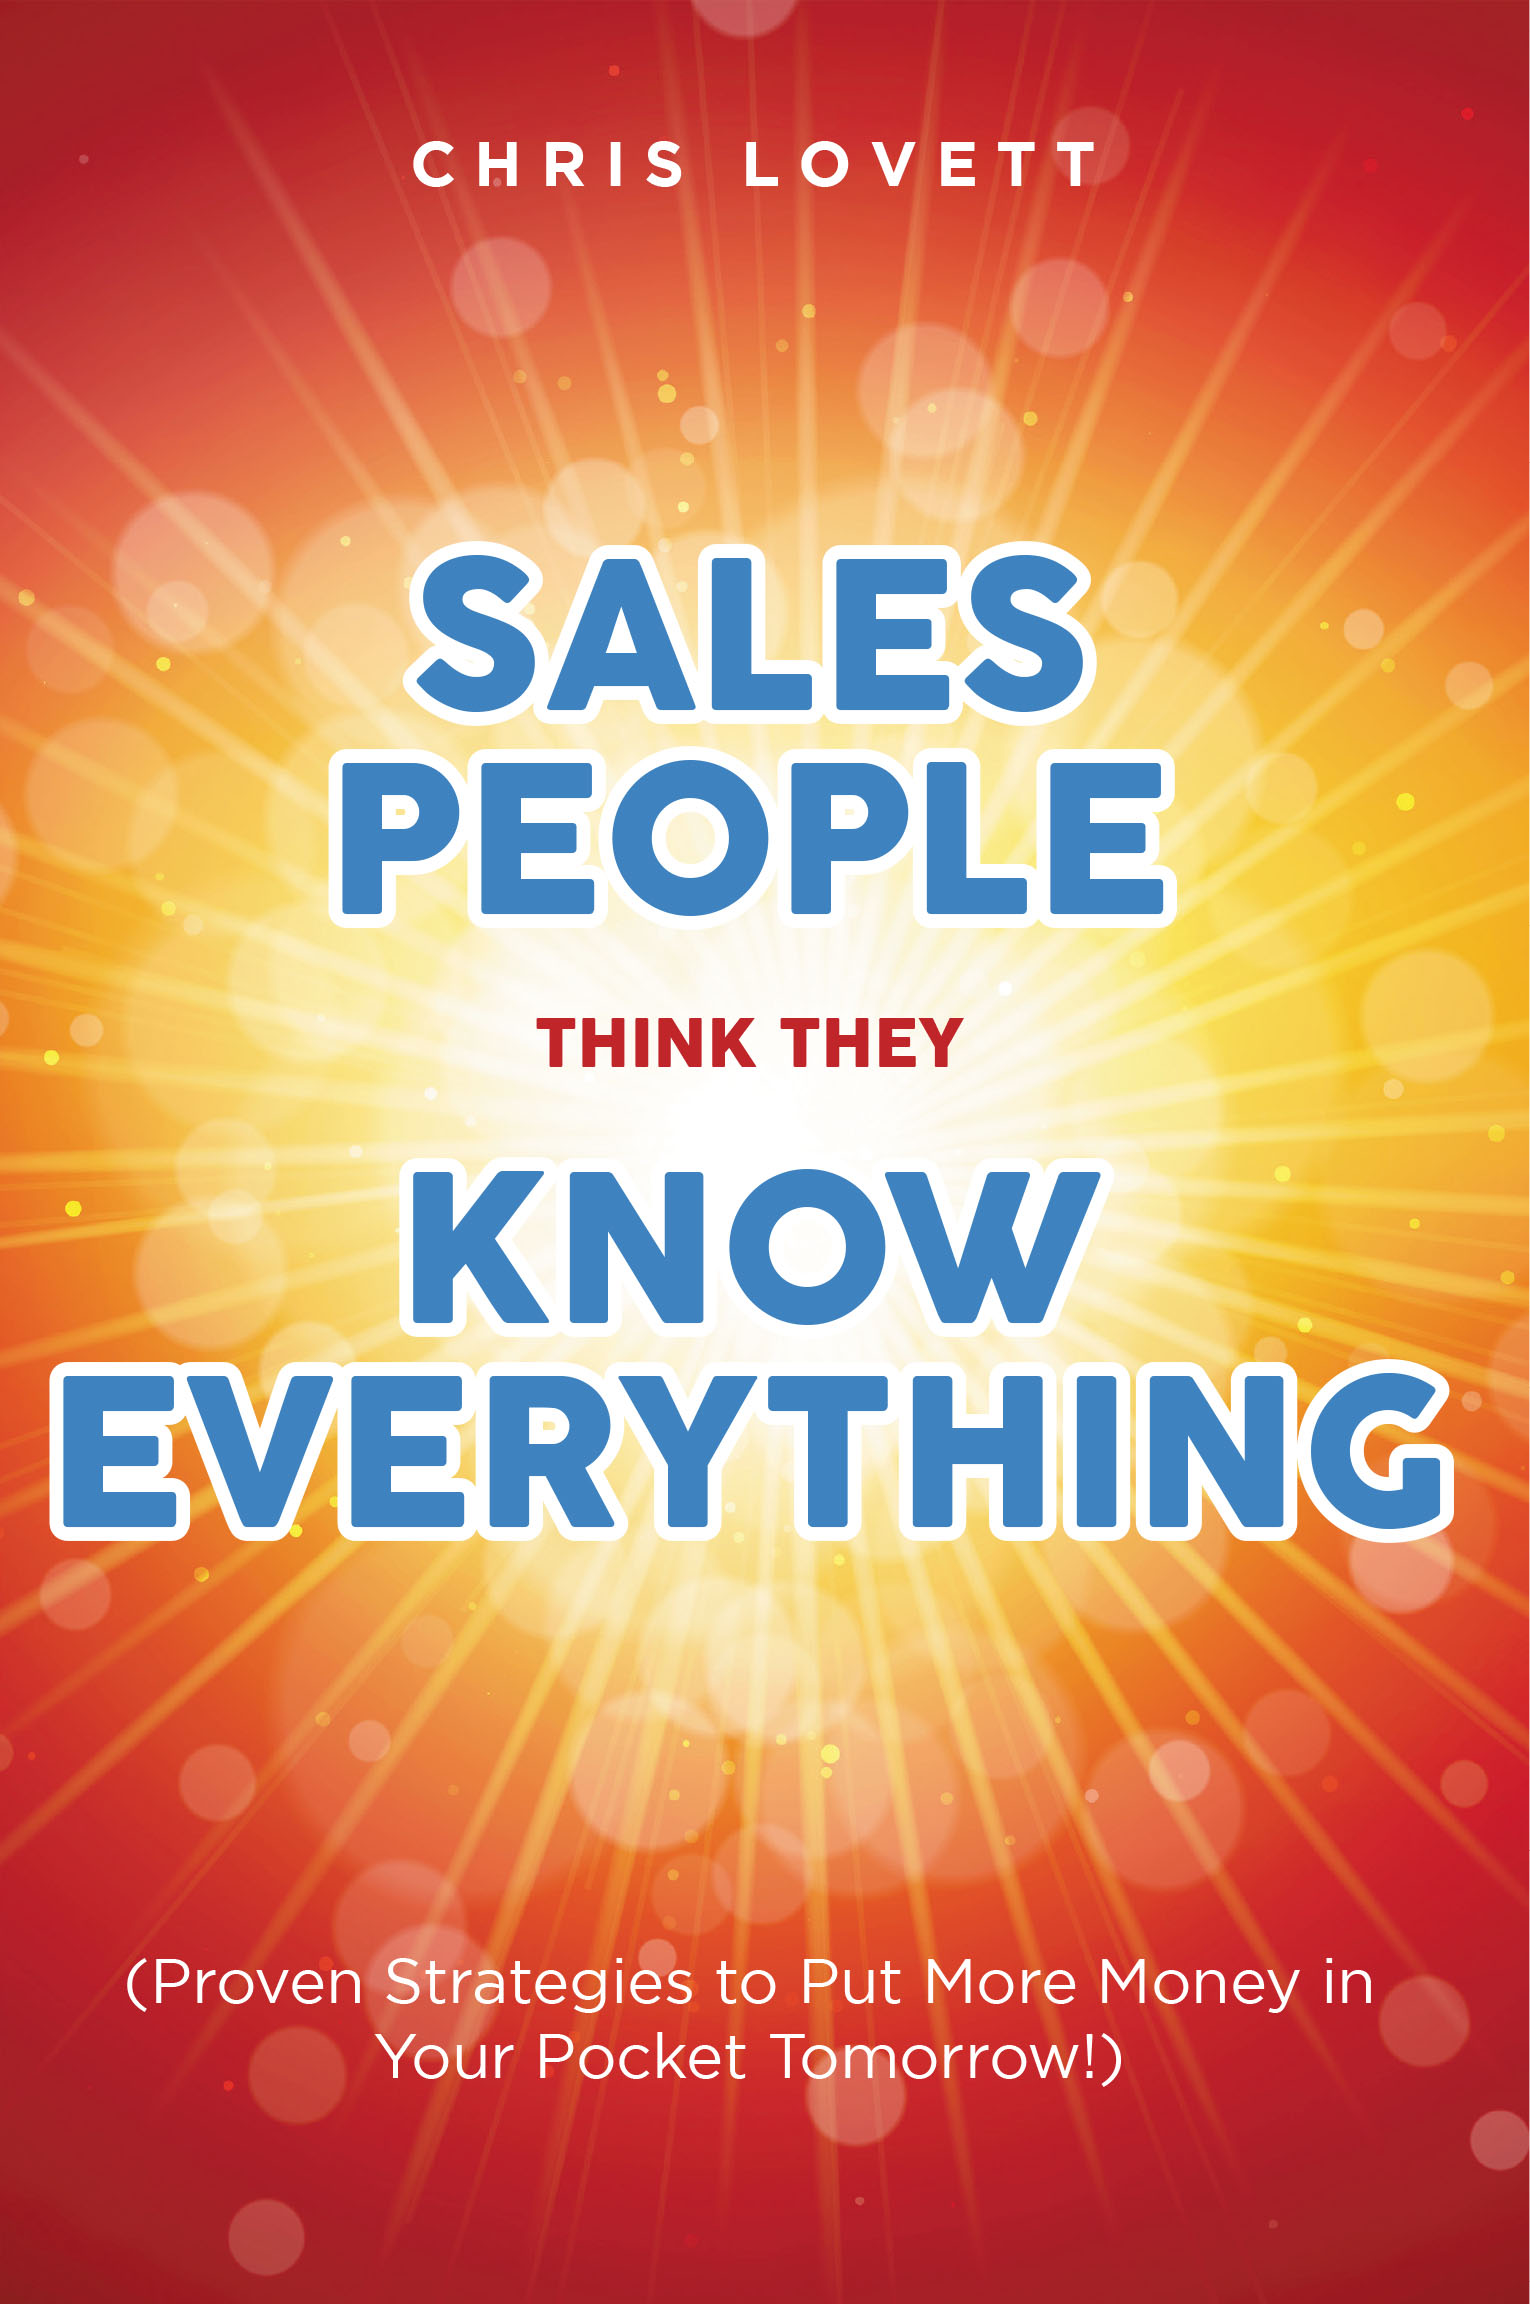 SALES PEOPLE THINK THEY KNOW EVERYTHING